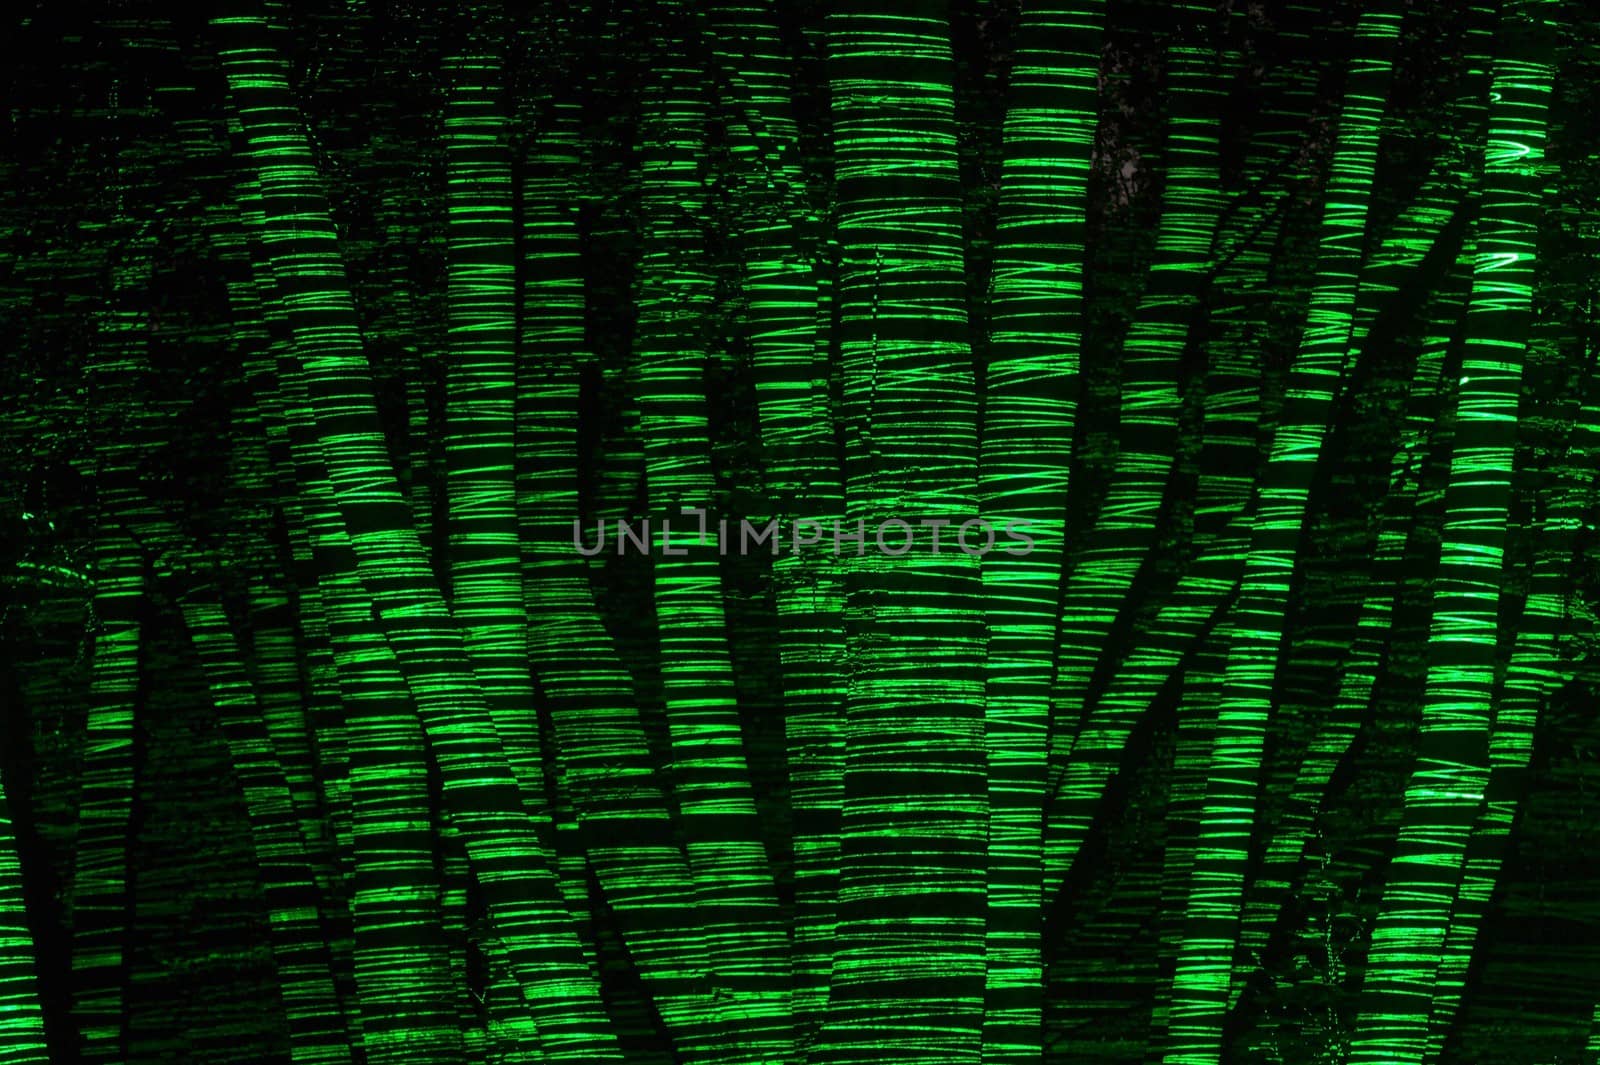 A group of trees are remarkably seen at night thanks to a green laser and a long exposure photography. The tracing of the laser was horizontal and thus the contours of the trees were clearly visible. In fact, we don't see their logs, but their profiles.